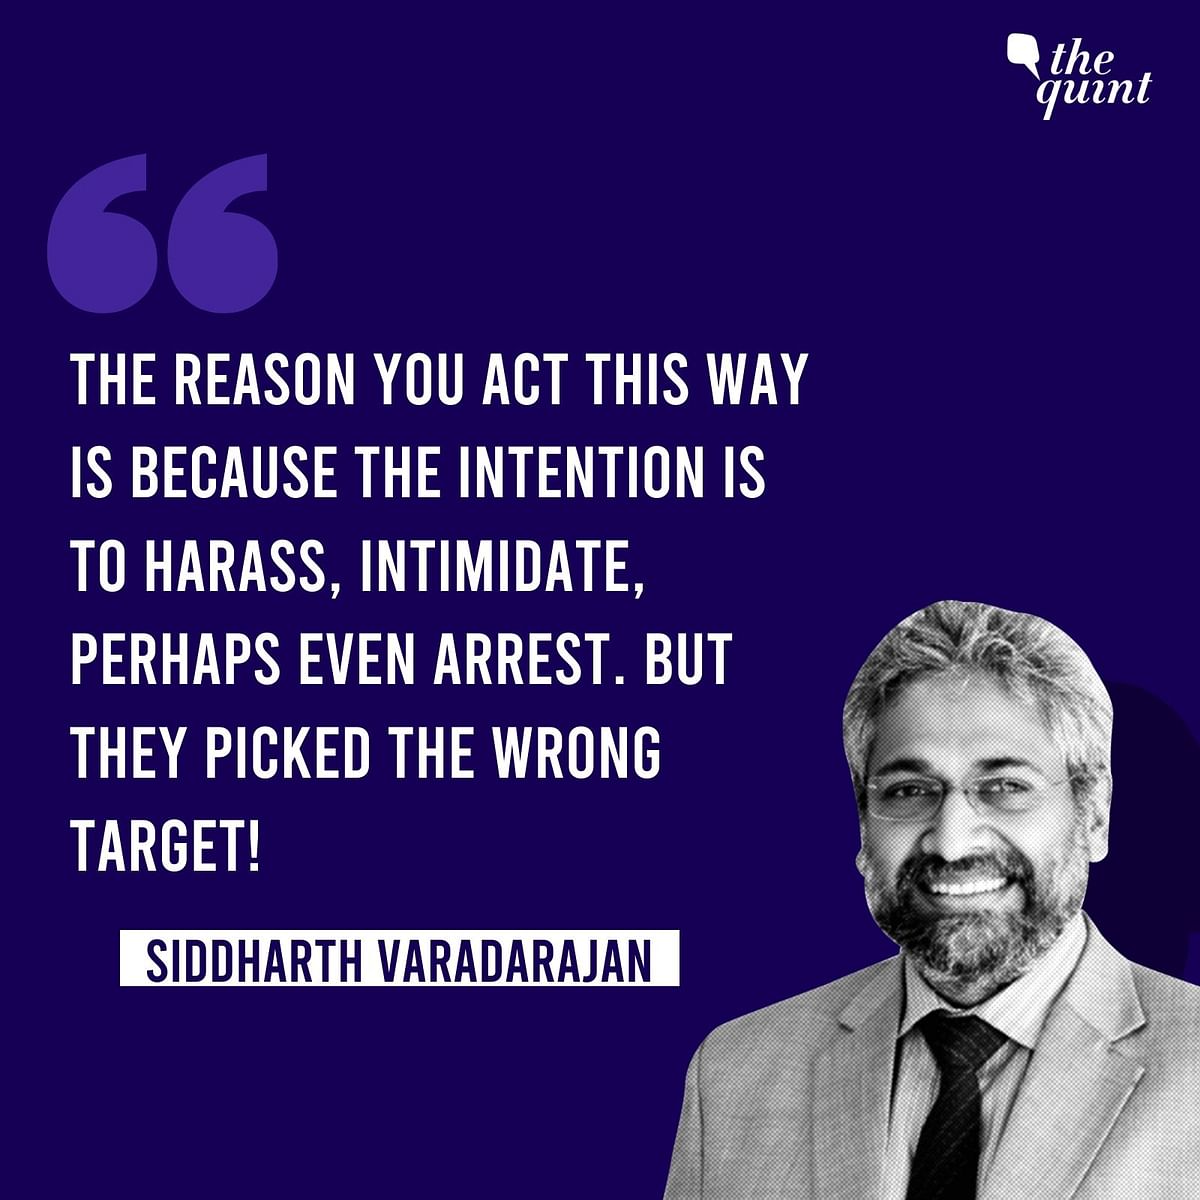 Siddharth Varadarajan said the UP govt’s actions show “the intention is to harass, intimidate, perhaps even arrest.”